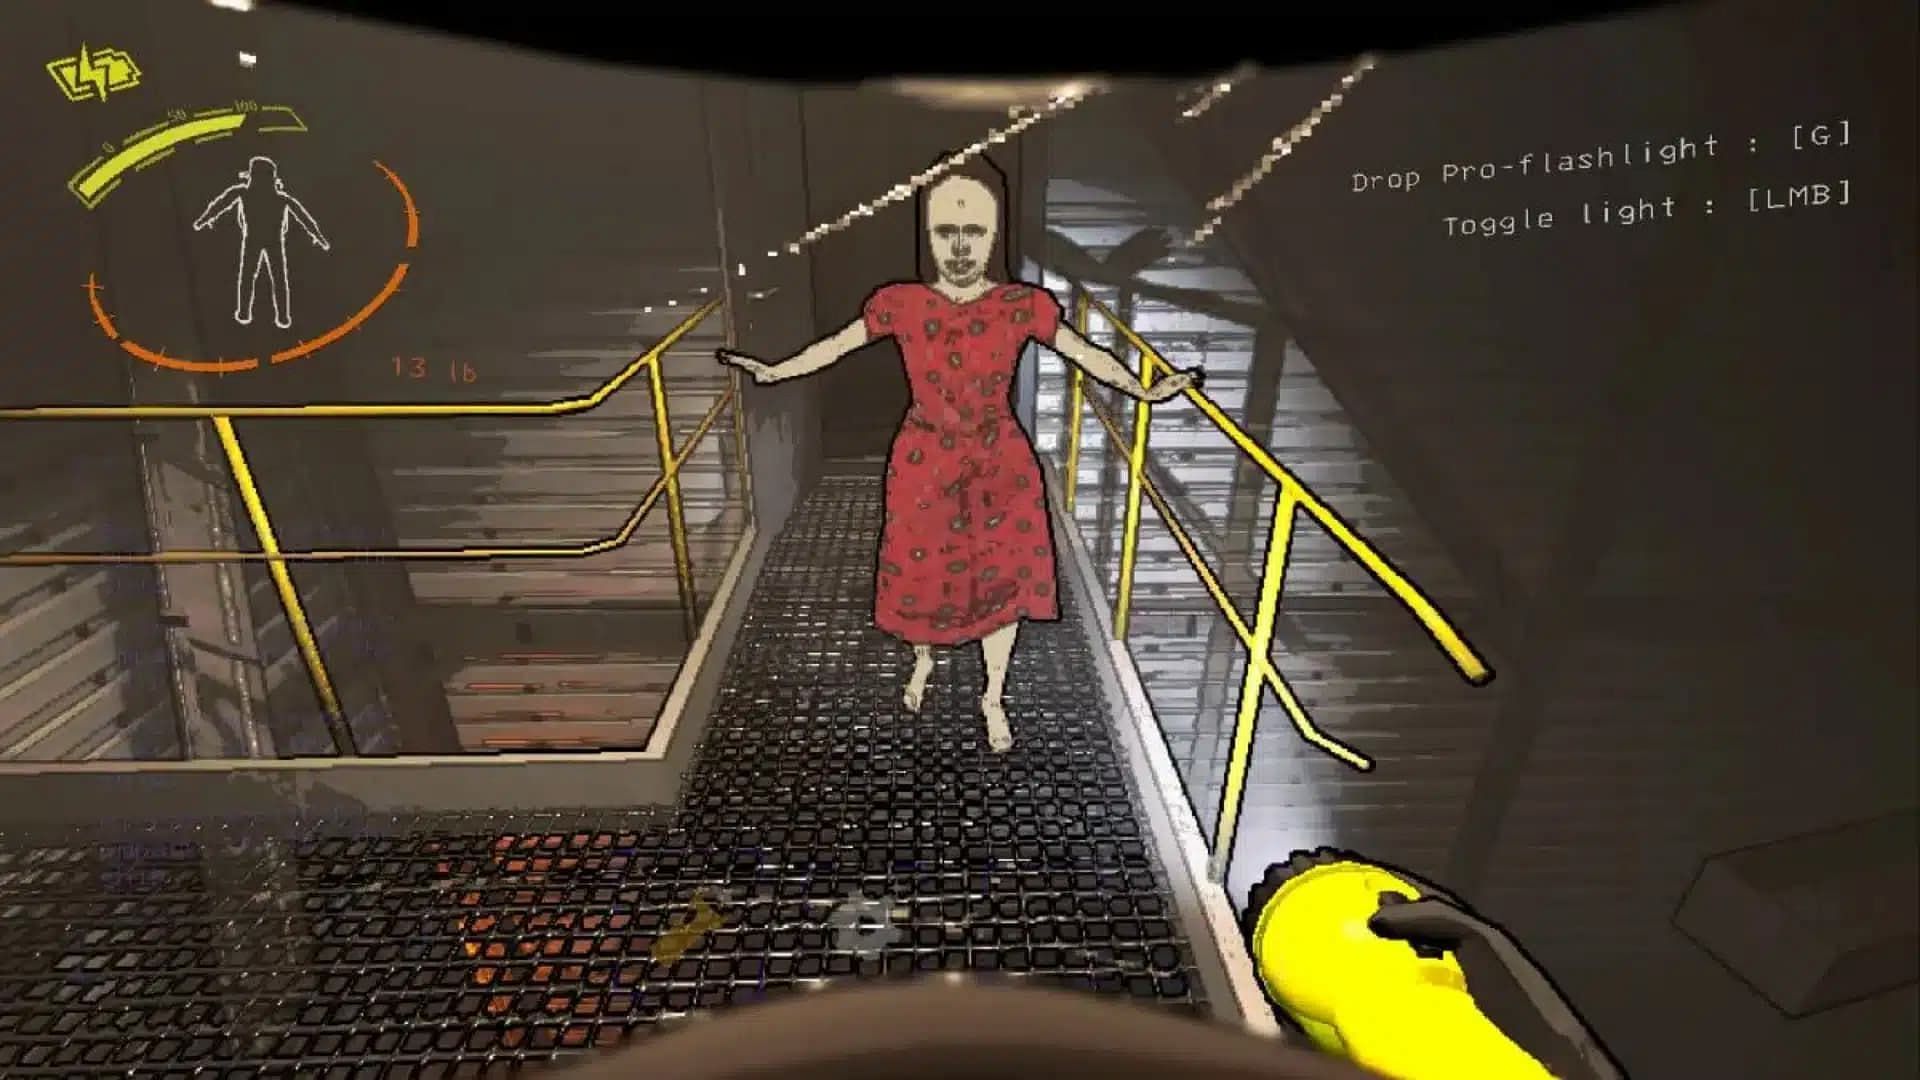 Ghost Girl is also known as the Girl in the Red Dress (Image via Zeekerss)